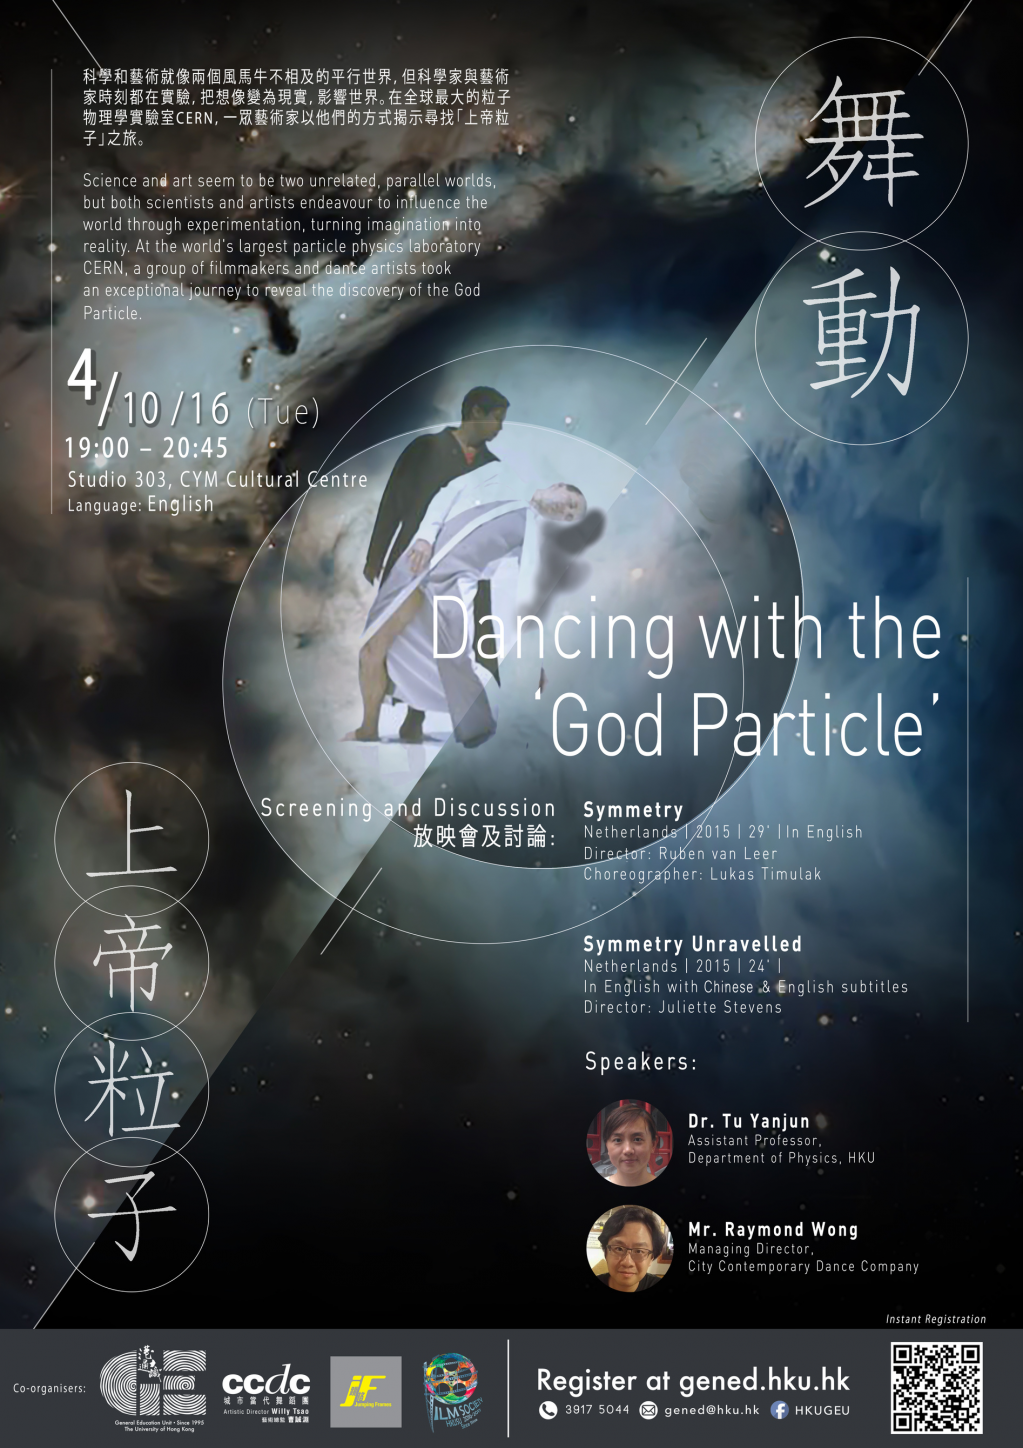 Science Meets Art: Dancing with the 'God Particle'  科學與藝術：舞動「上帝粒子」